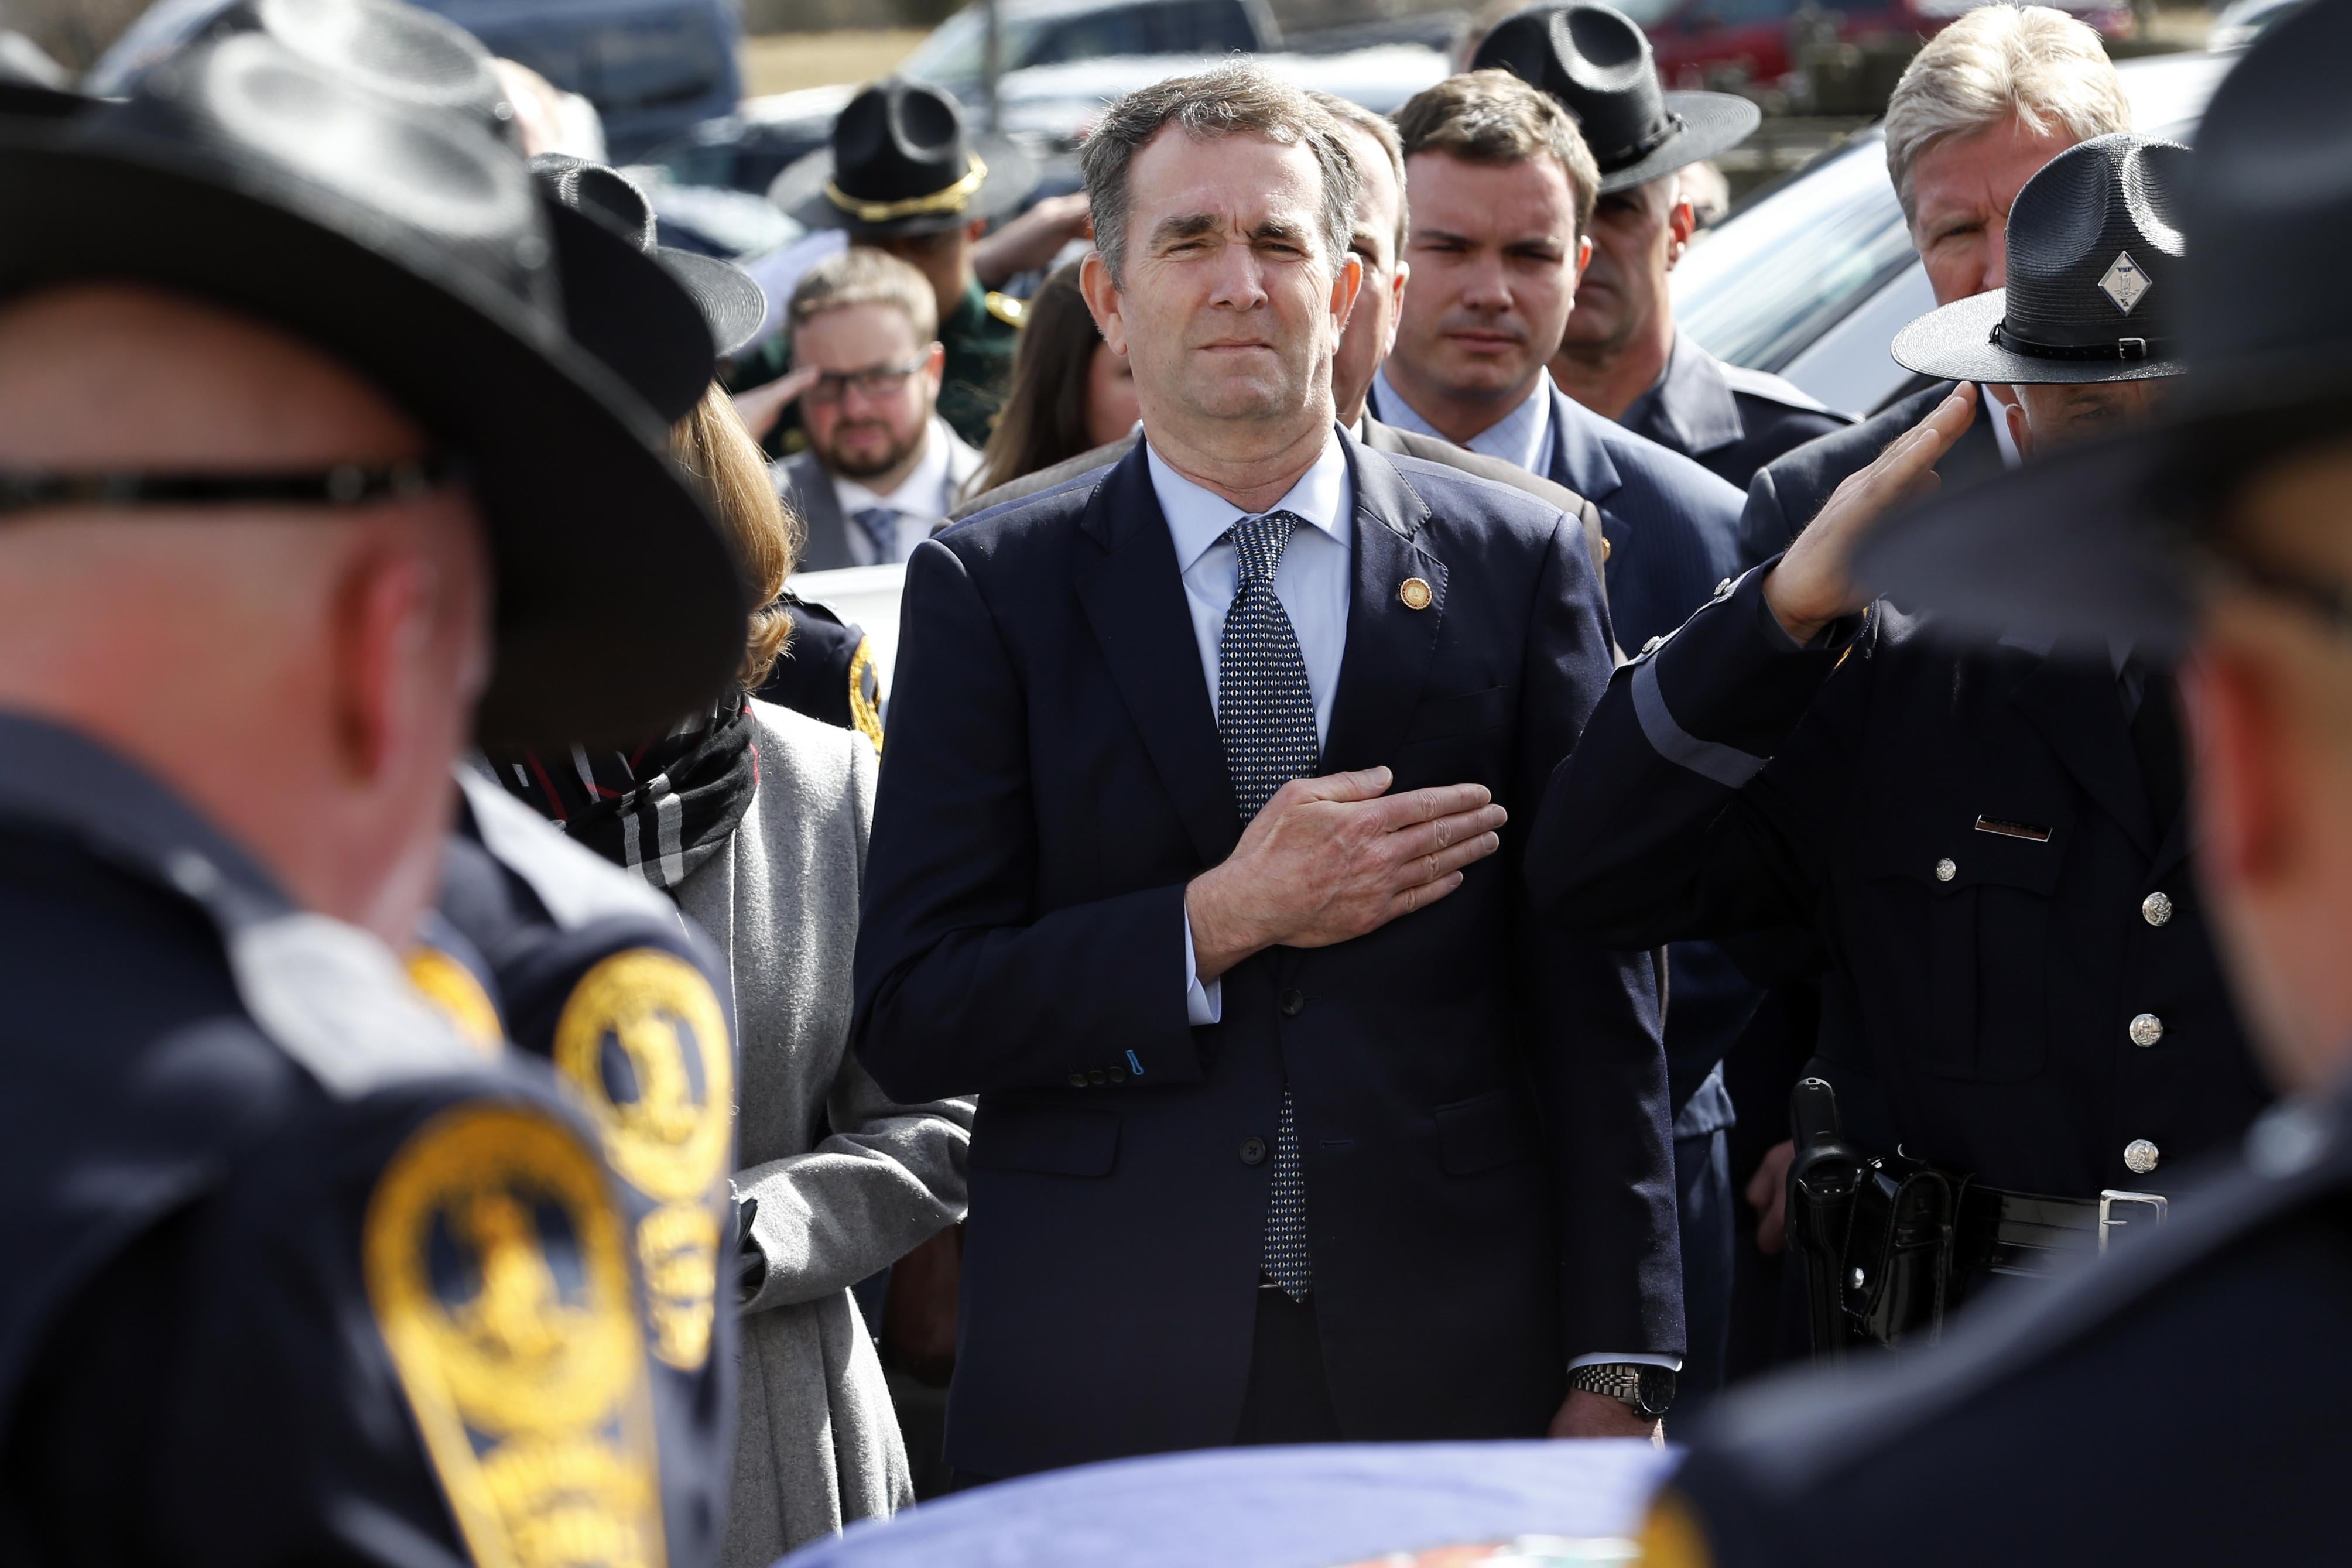 Virginia Gov. Ralph Northam watches as the casket of fallen Virginia State Trooper Lucas B. Dowell is carried to a waiting tactical vehicle during the funeral at the Chilhowie Christian Church on February 9, 2019 in Chilhowie, Virginia.